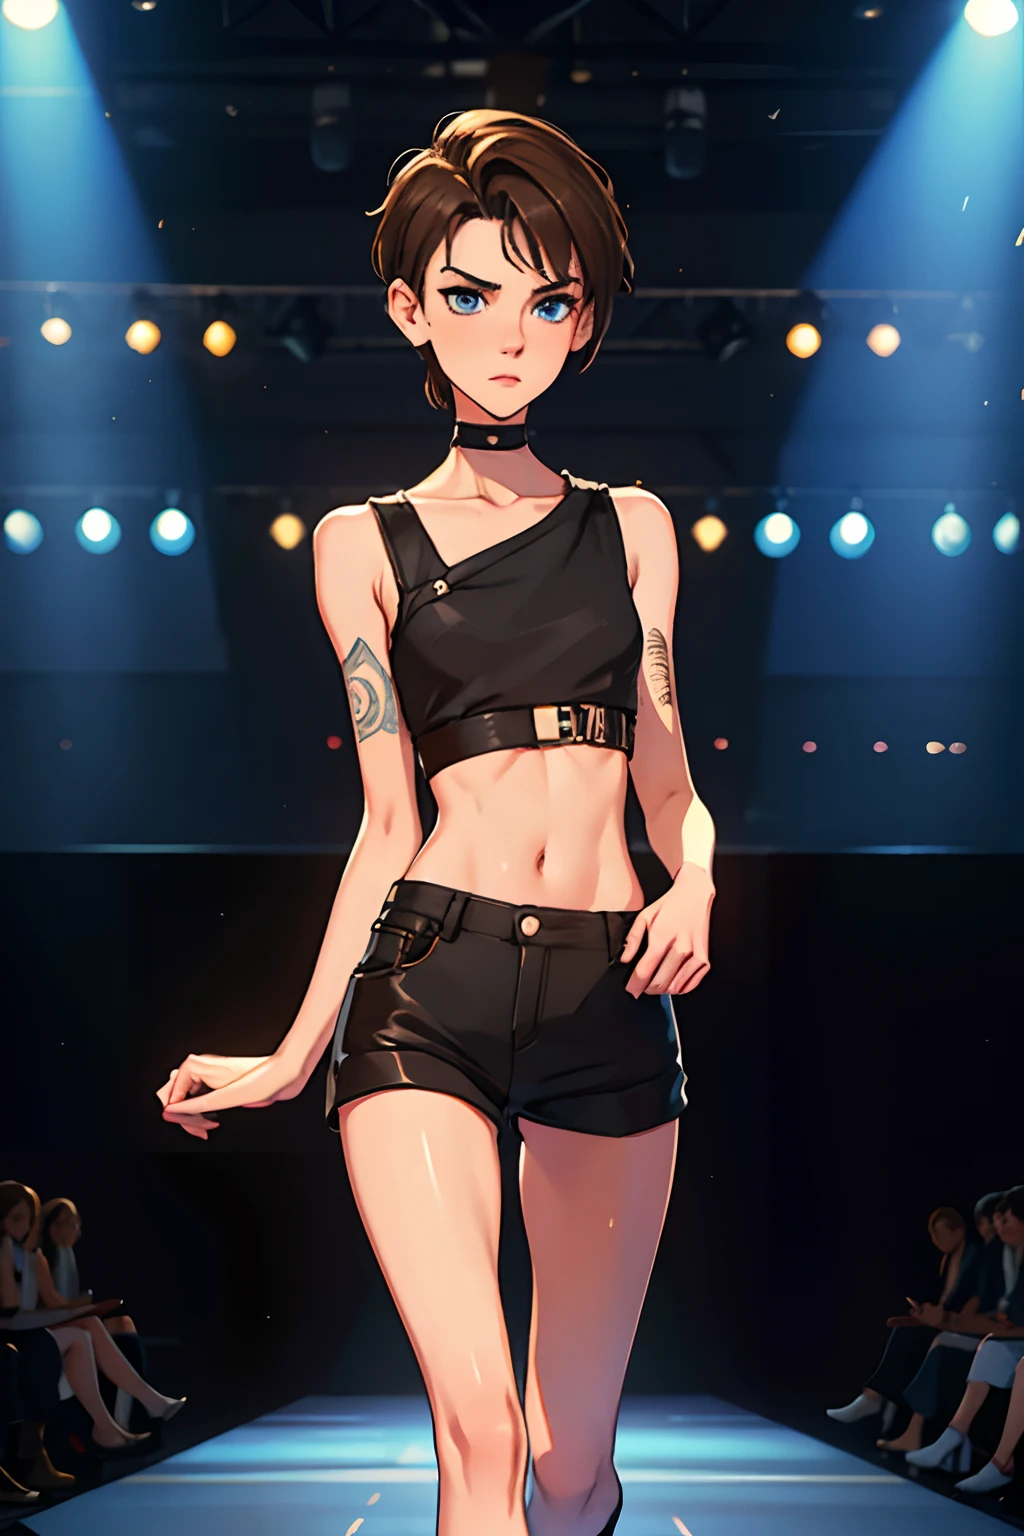 full figure, Jana Novak 16 years old, lanky girl, very thin, blue eyes, short brown punk hair shaved on one side and long on the other, high cheekbones, slightly aquiline pointed nose, pointed chin, cute face, androgynous, walking on the catwalk of a trendy fashion show.